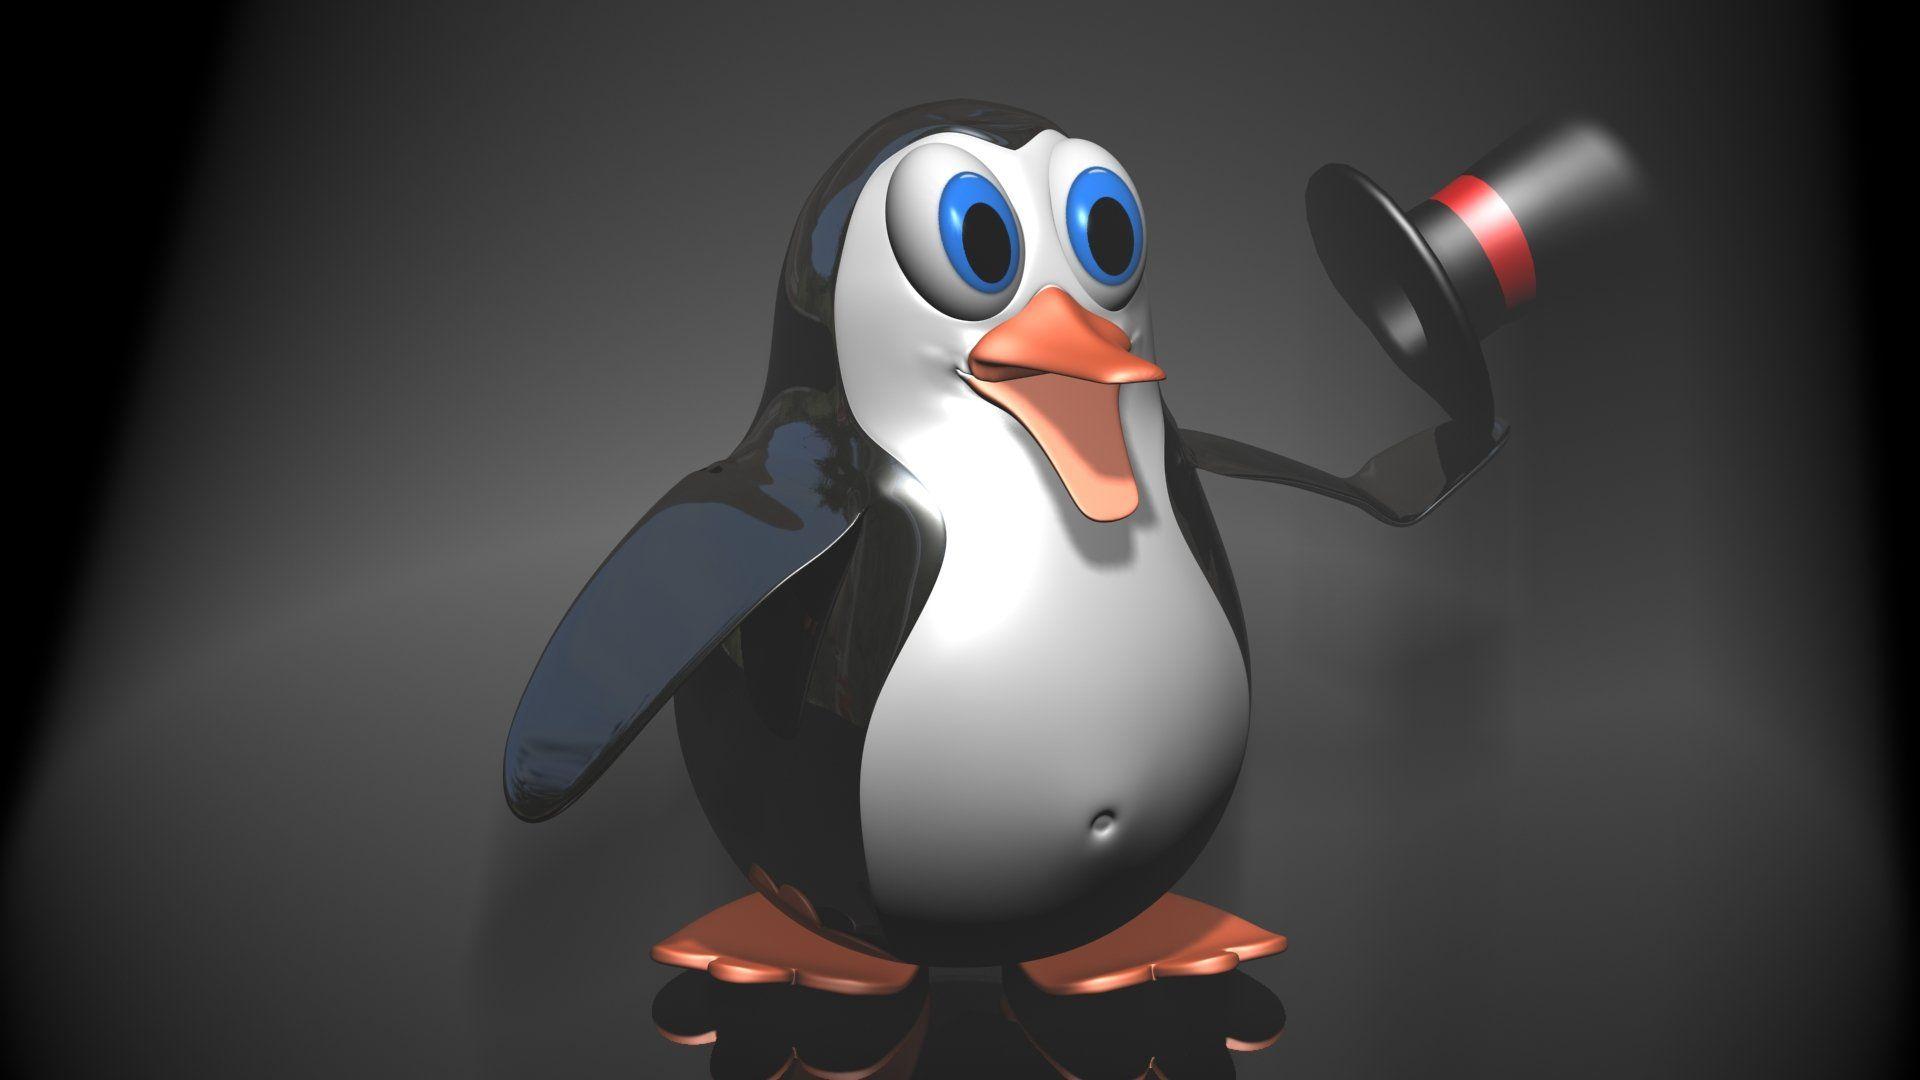 Animated Penguin Wallpapers Wallpaper Cave